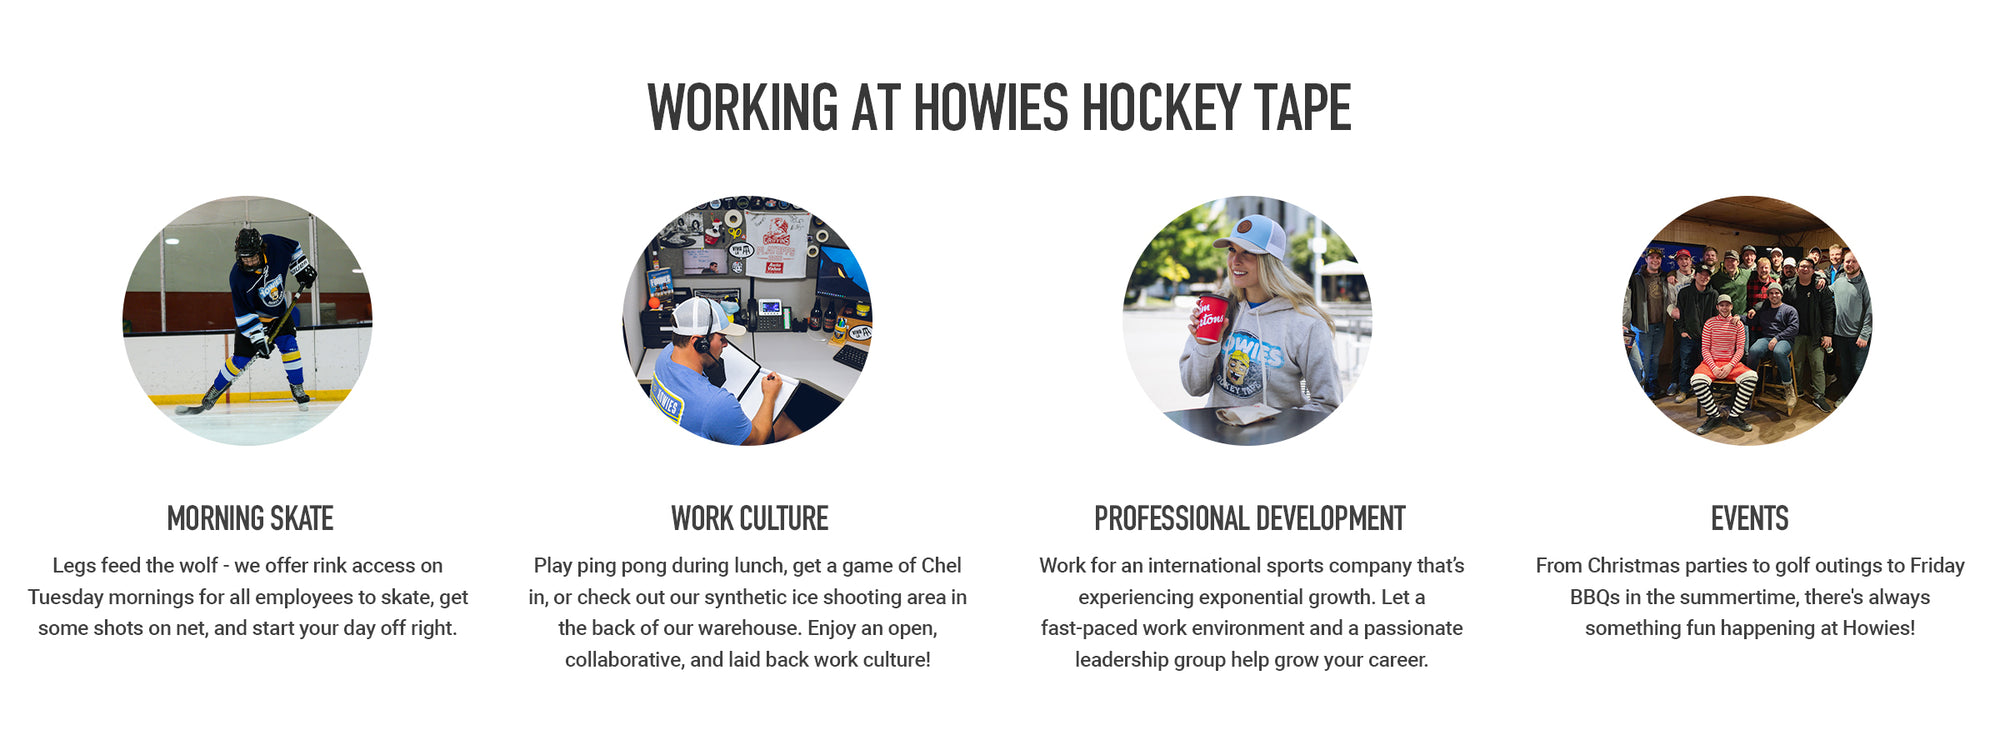 Working at Howies Hockey Tape